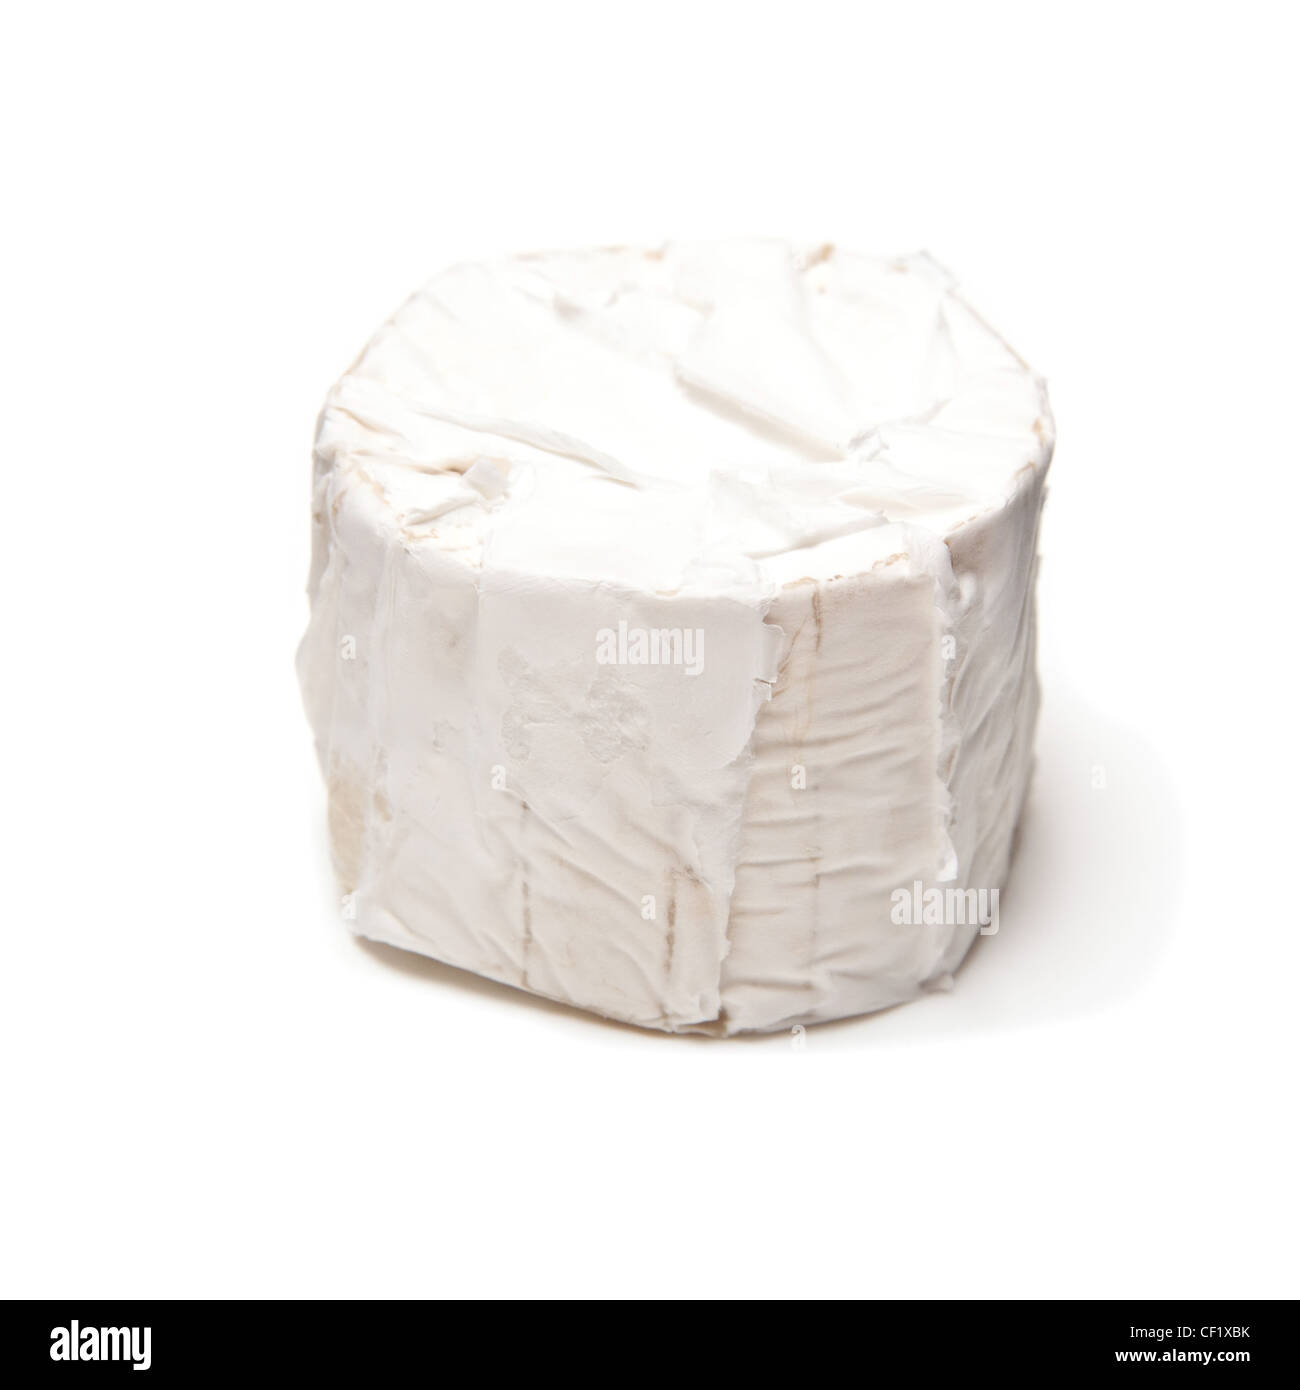 Fromage de chèvre Gevrik isolated on a white background studio. Banque D'Images